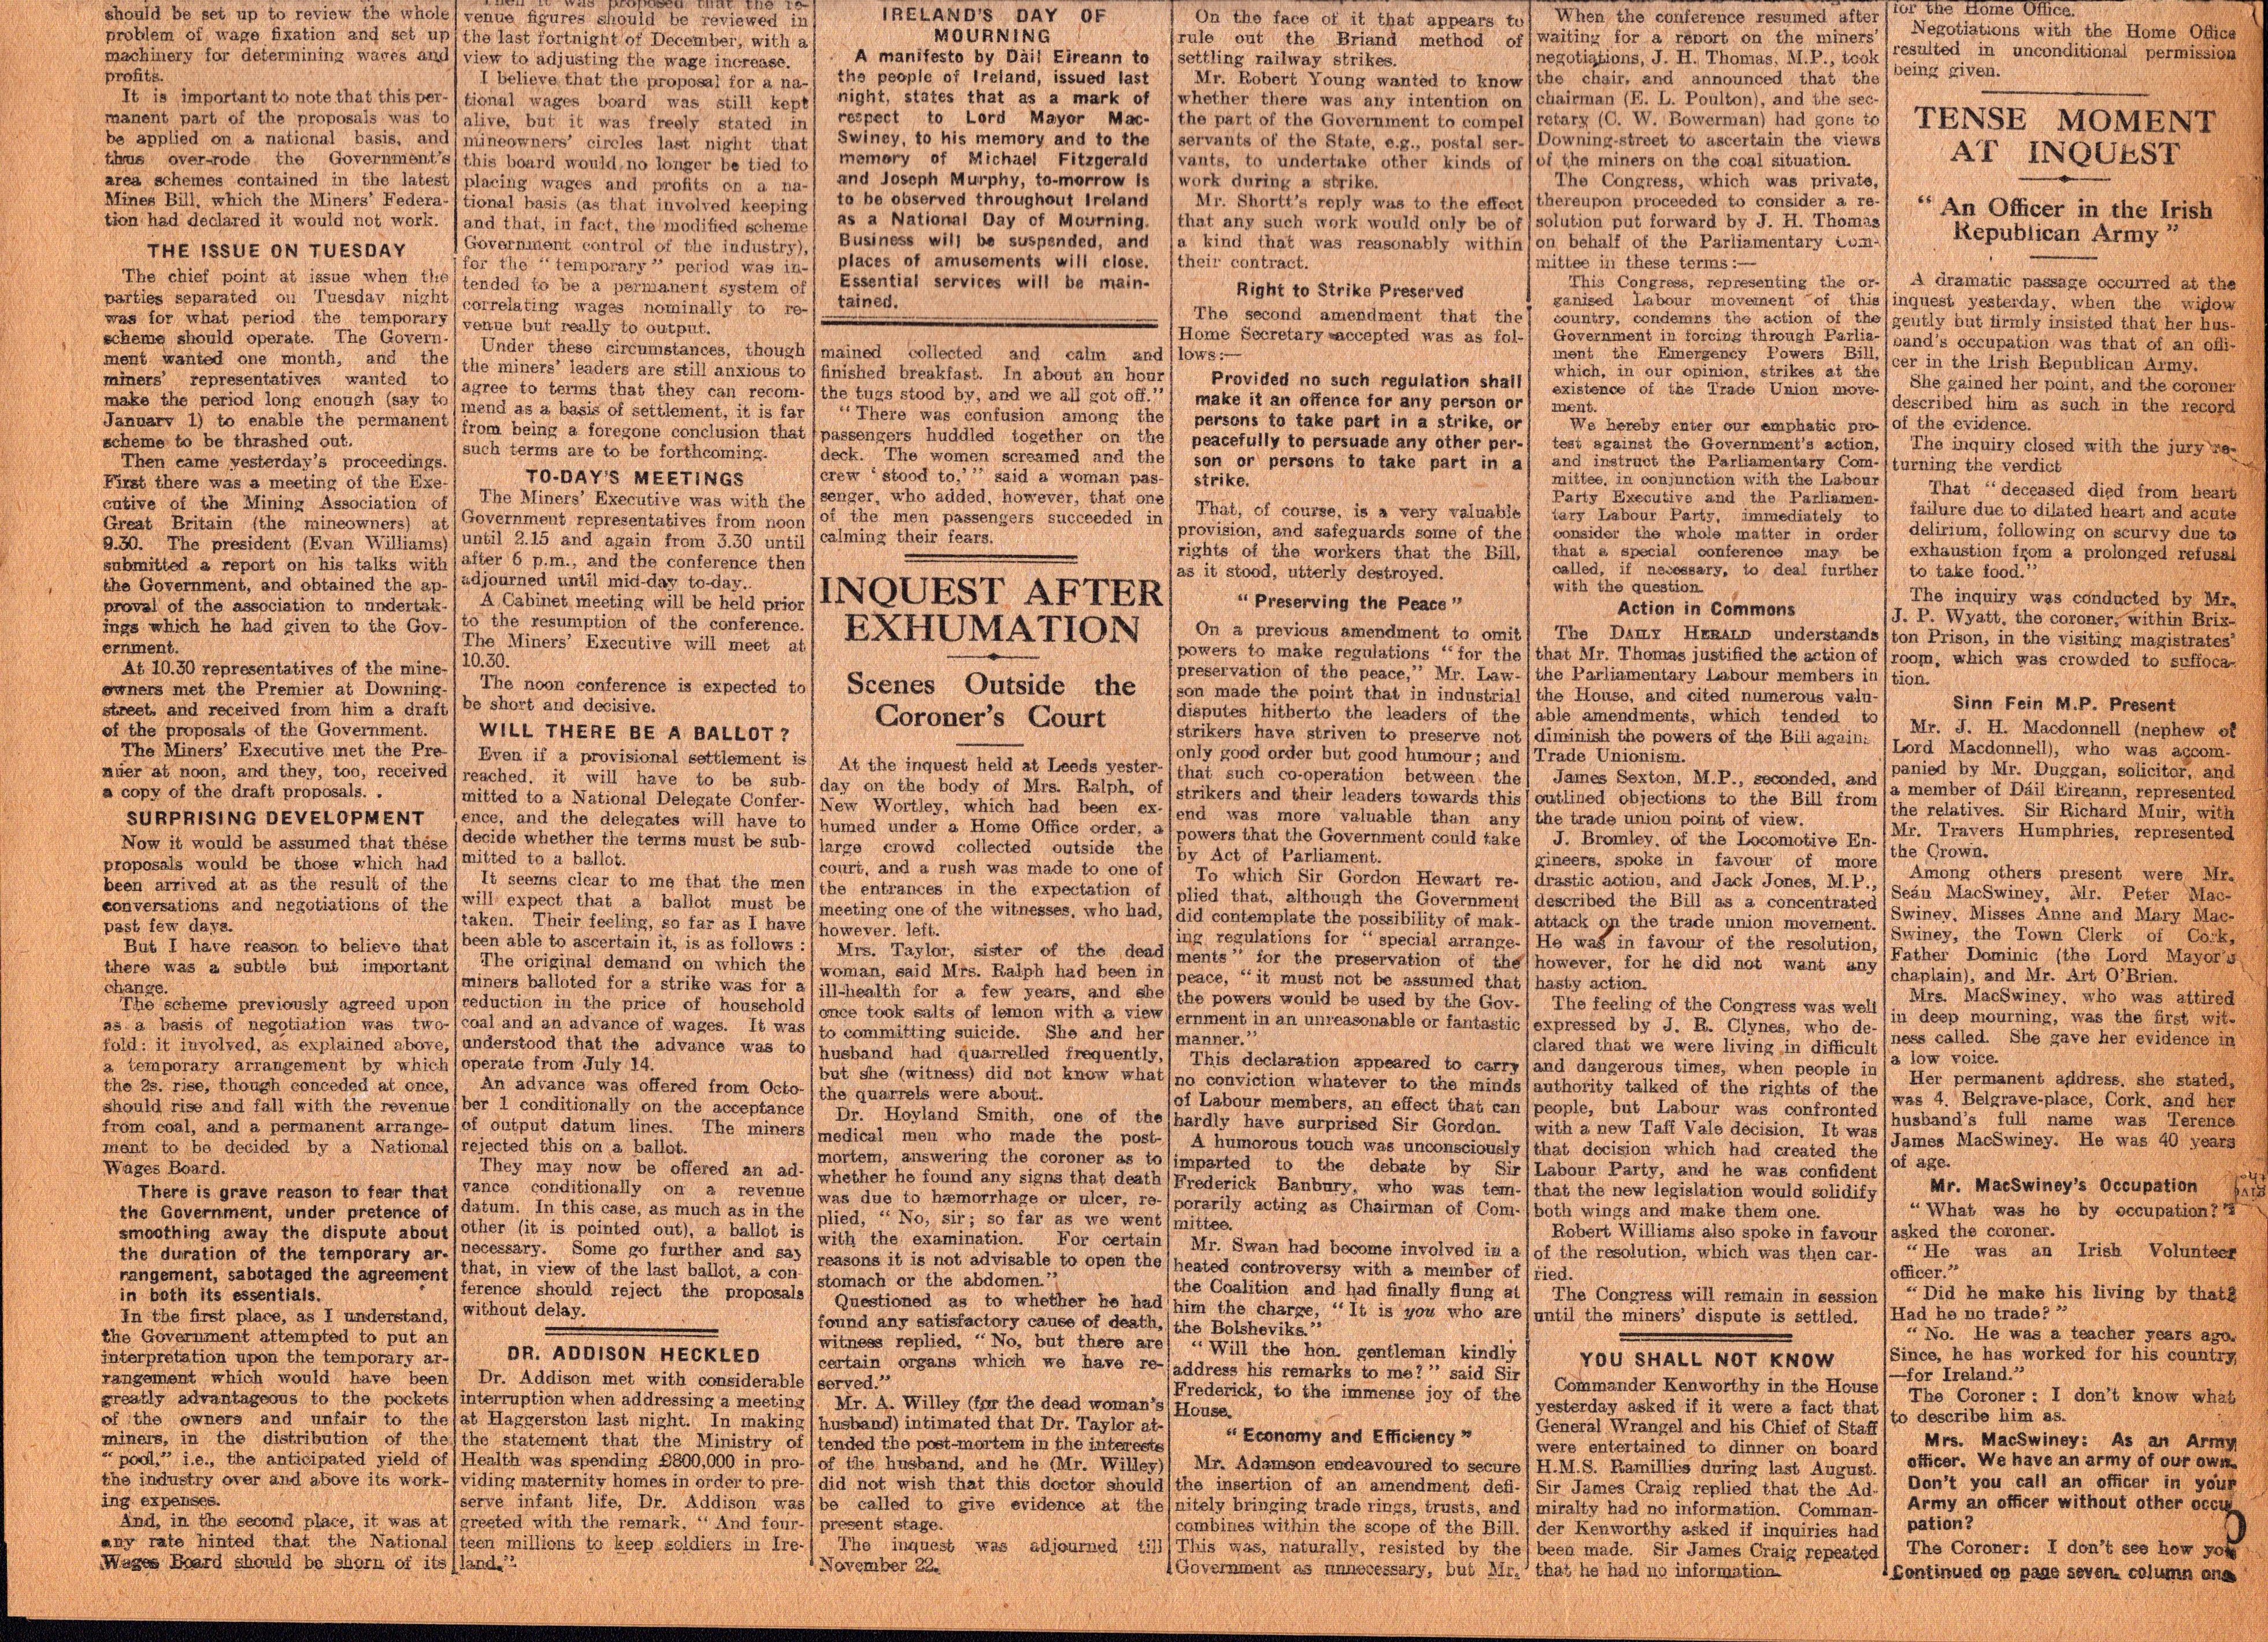 Irish War of Independence News Reports Black & Tans, Hunger Strikes 1920-14. - Image 2 of 4